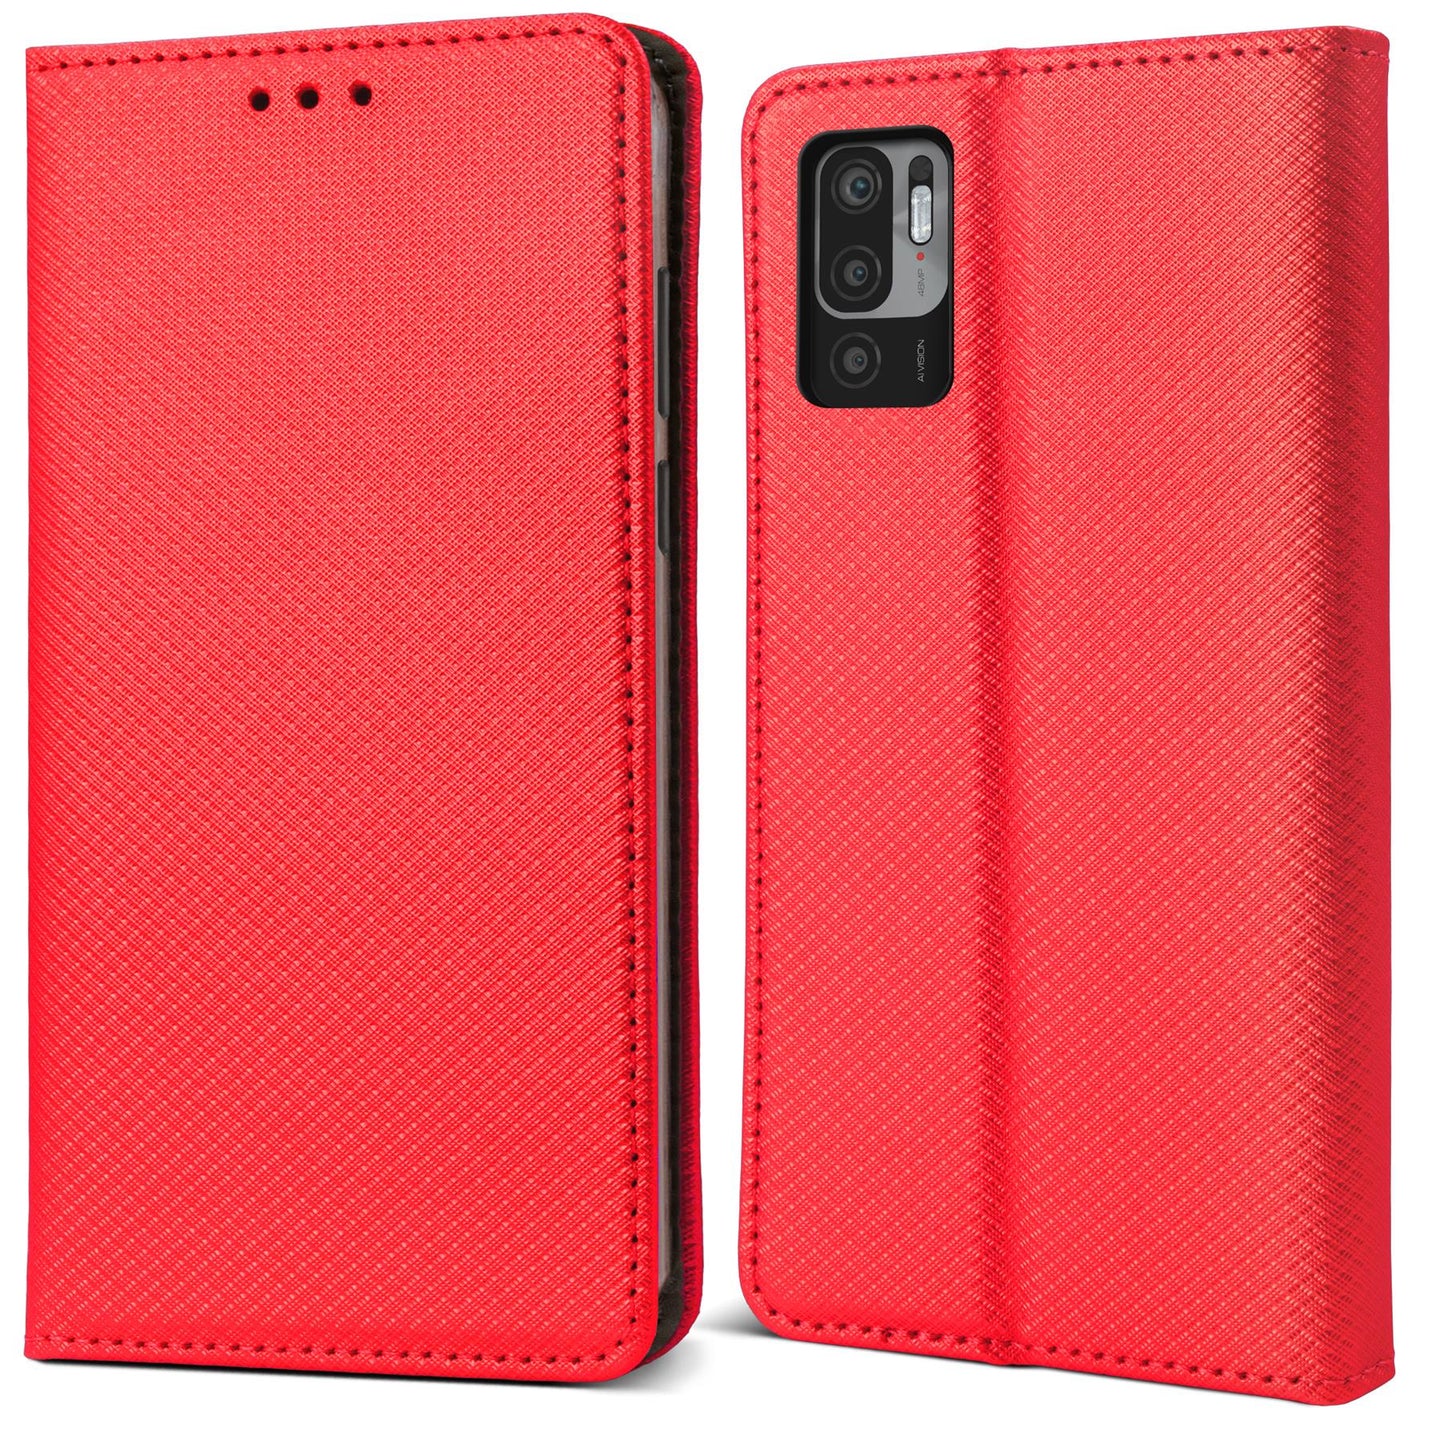 Moozy Case Flip Cover for Xiaomi Redmi Note 10 5G and Poco M3 Pro 5G, Red - Smart Magnetic Flip Case Flip Folio Wallet Case with Card Holder and Stand, Credit Card Slots, Kickstand Function